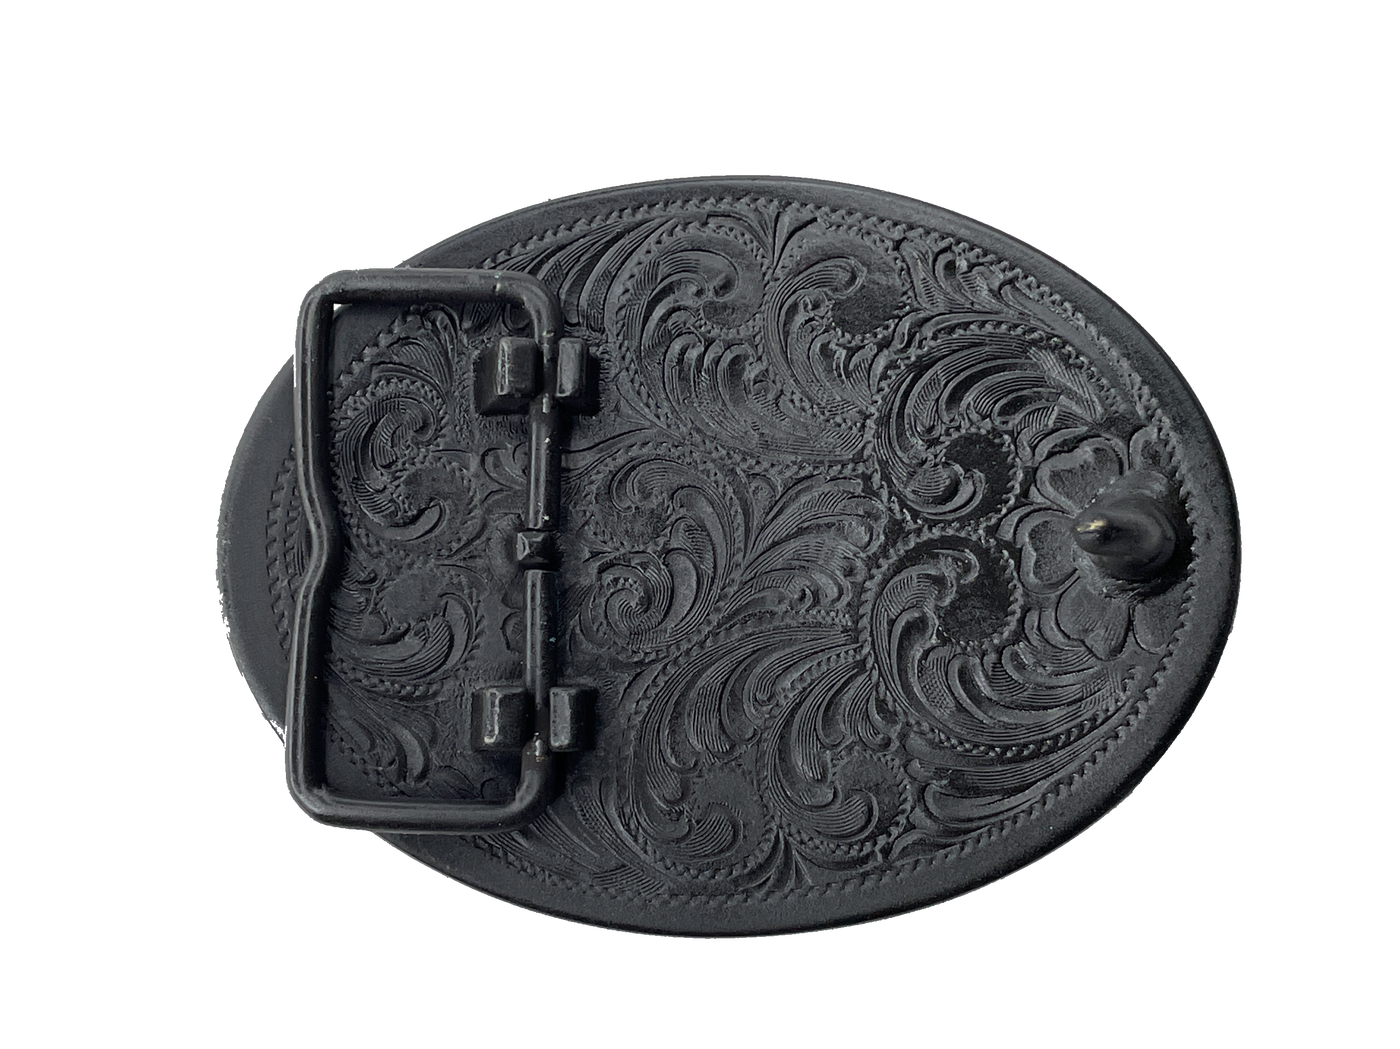 Nebraska State buckle by AndWest Dimensions are 3" tall by 3 3/4" wide Fits belts up to 1 1/2" wide Buckle is brass colored with Nebraska Cornhusker State embossed across front of buckle. Farming scene in the back behind "Nebraska". Back of buckle has Western scroll design Available in our online store and in the retail shop in Smyrna, TN, just outside of Nashville. Made in Mexico